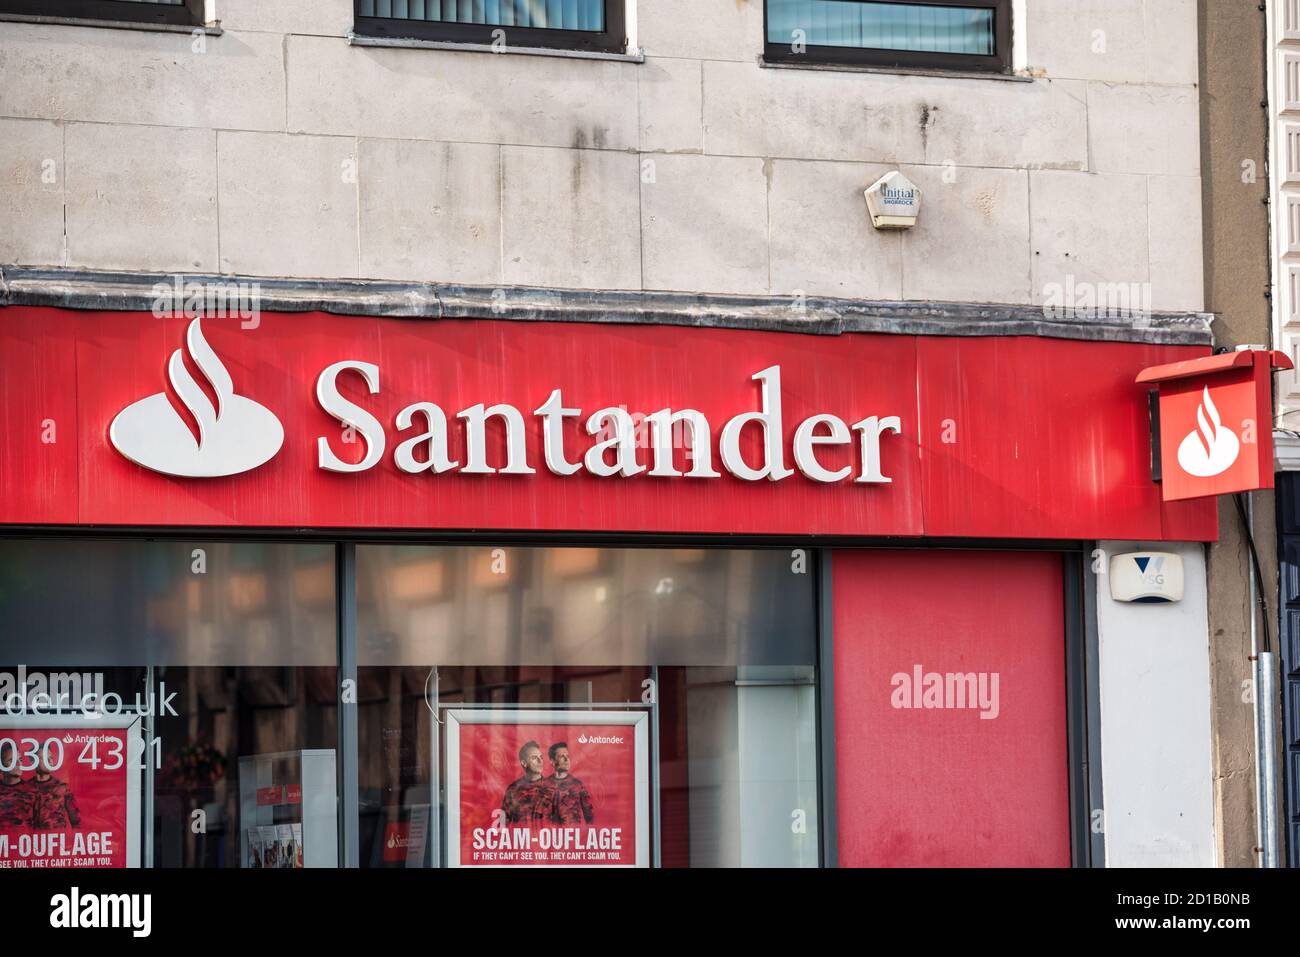 Derry, Northern Ireland- Sept 27, 2020: The sign for the Santander Bank in Derry Northern Ireland. Stock Photo